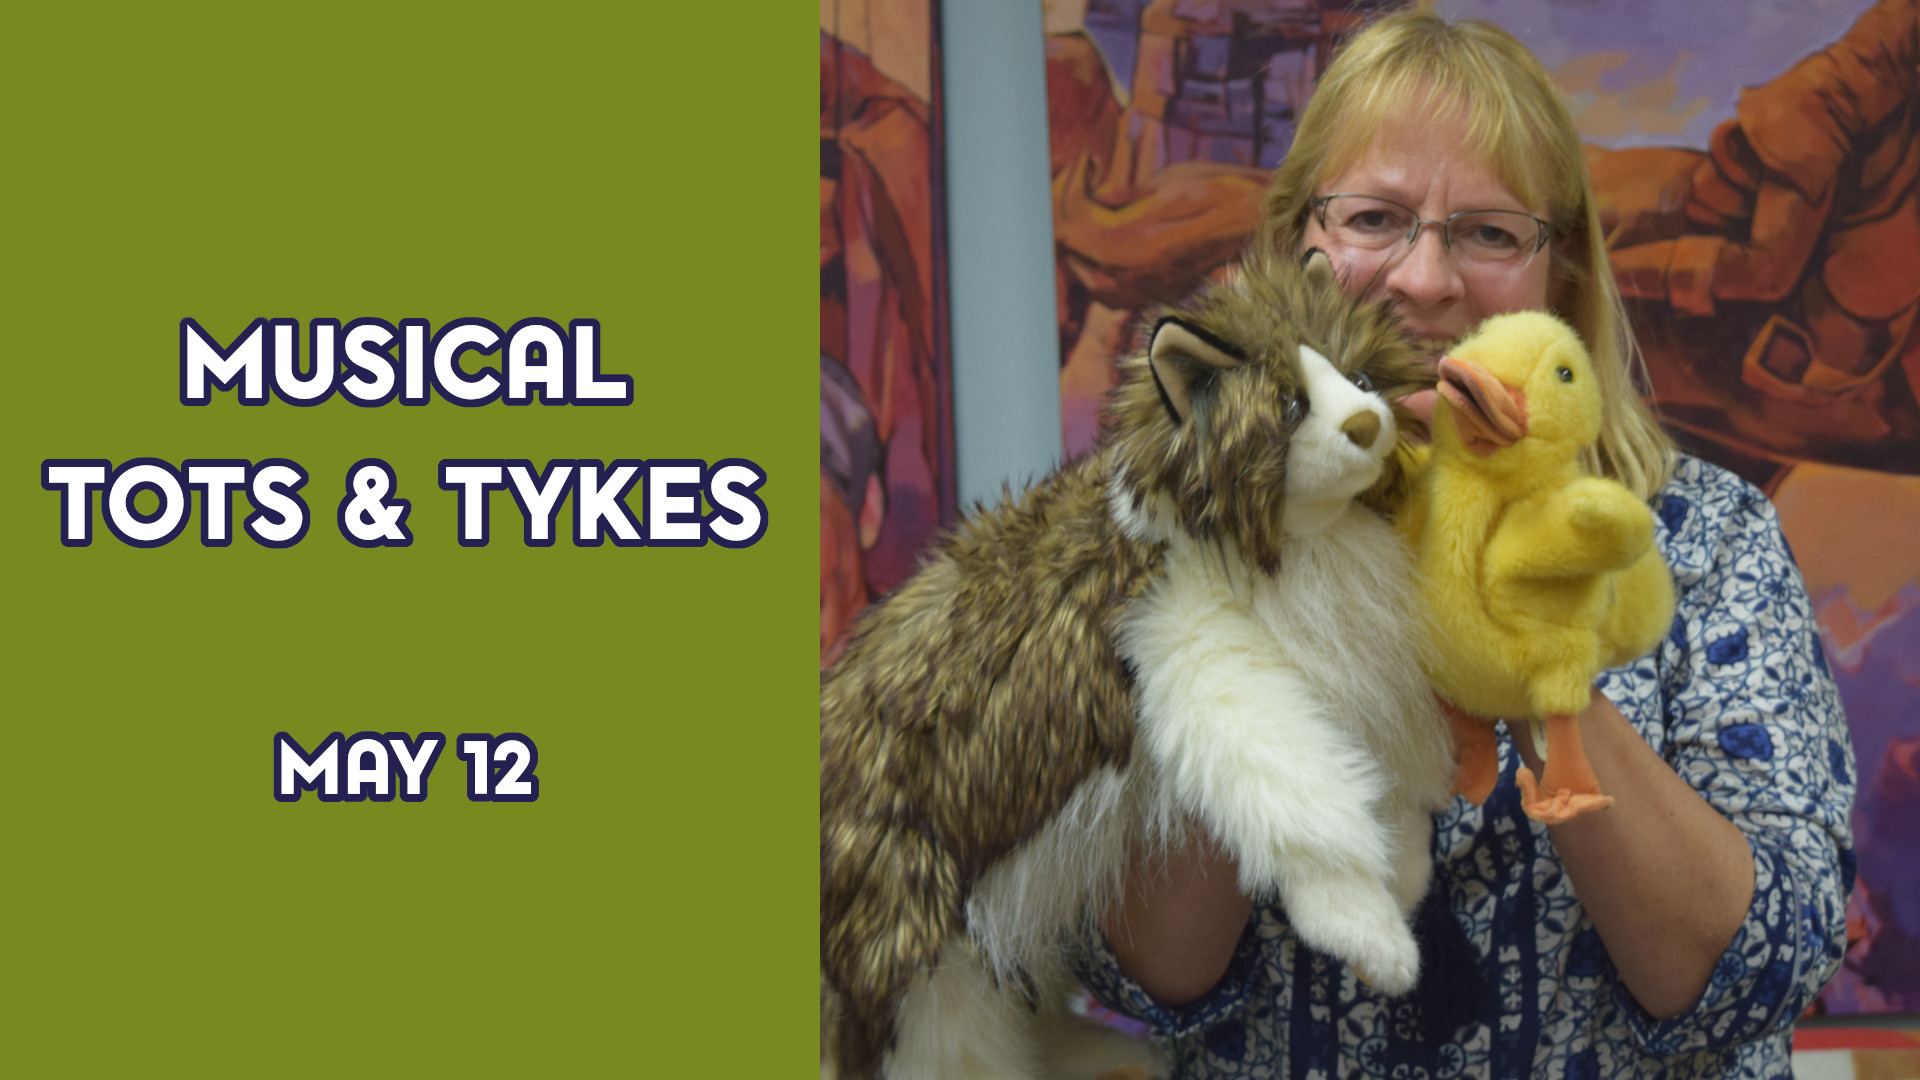 A woman holds puppets next to the text "Musical Tots & Tykes May 12"